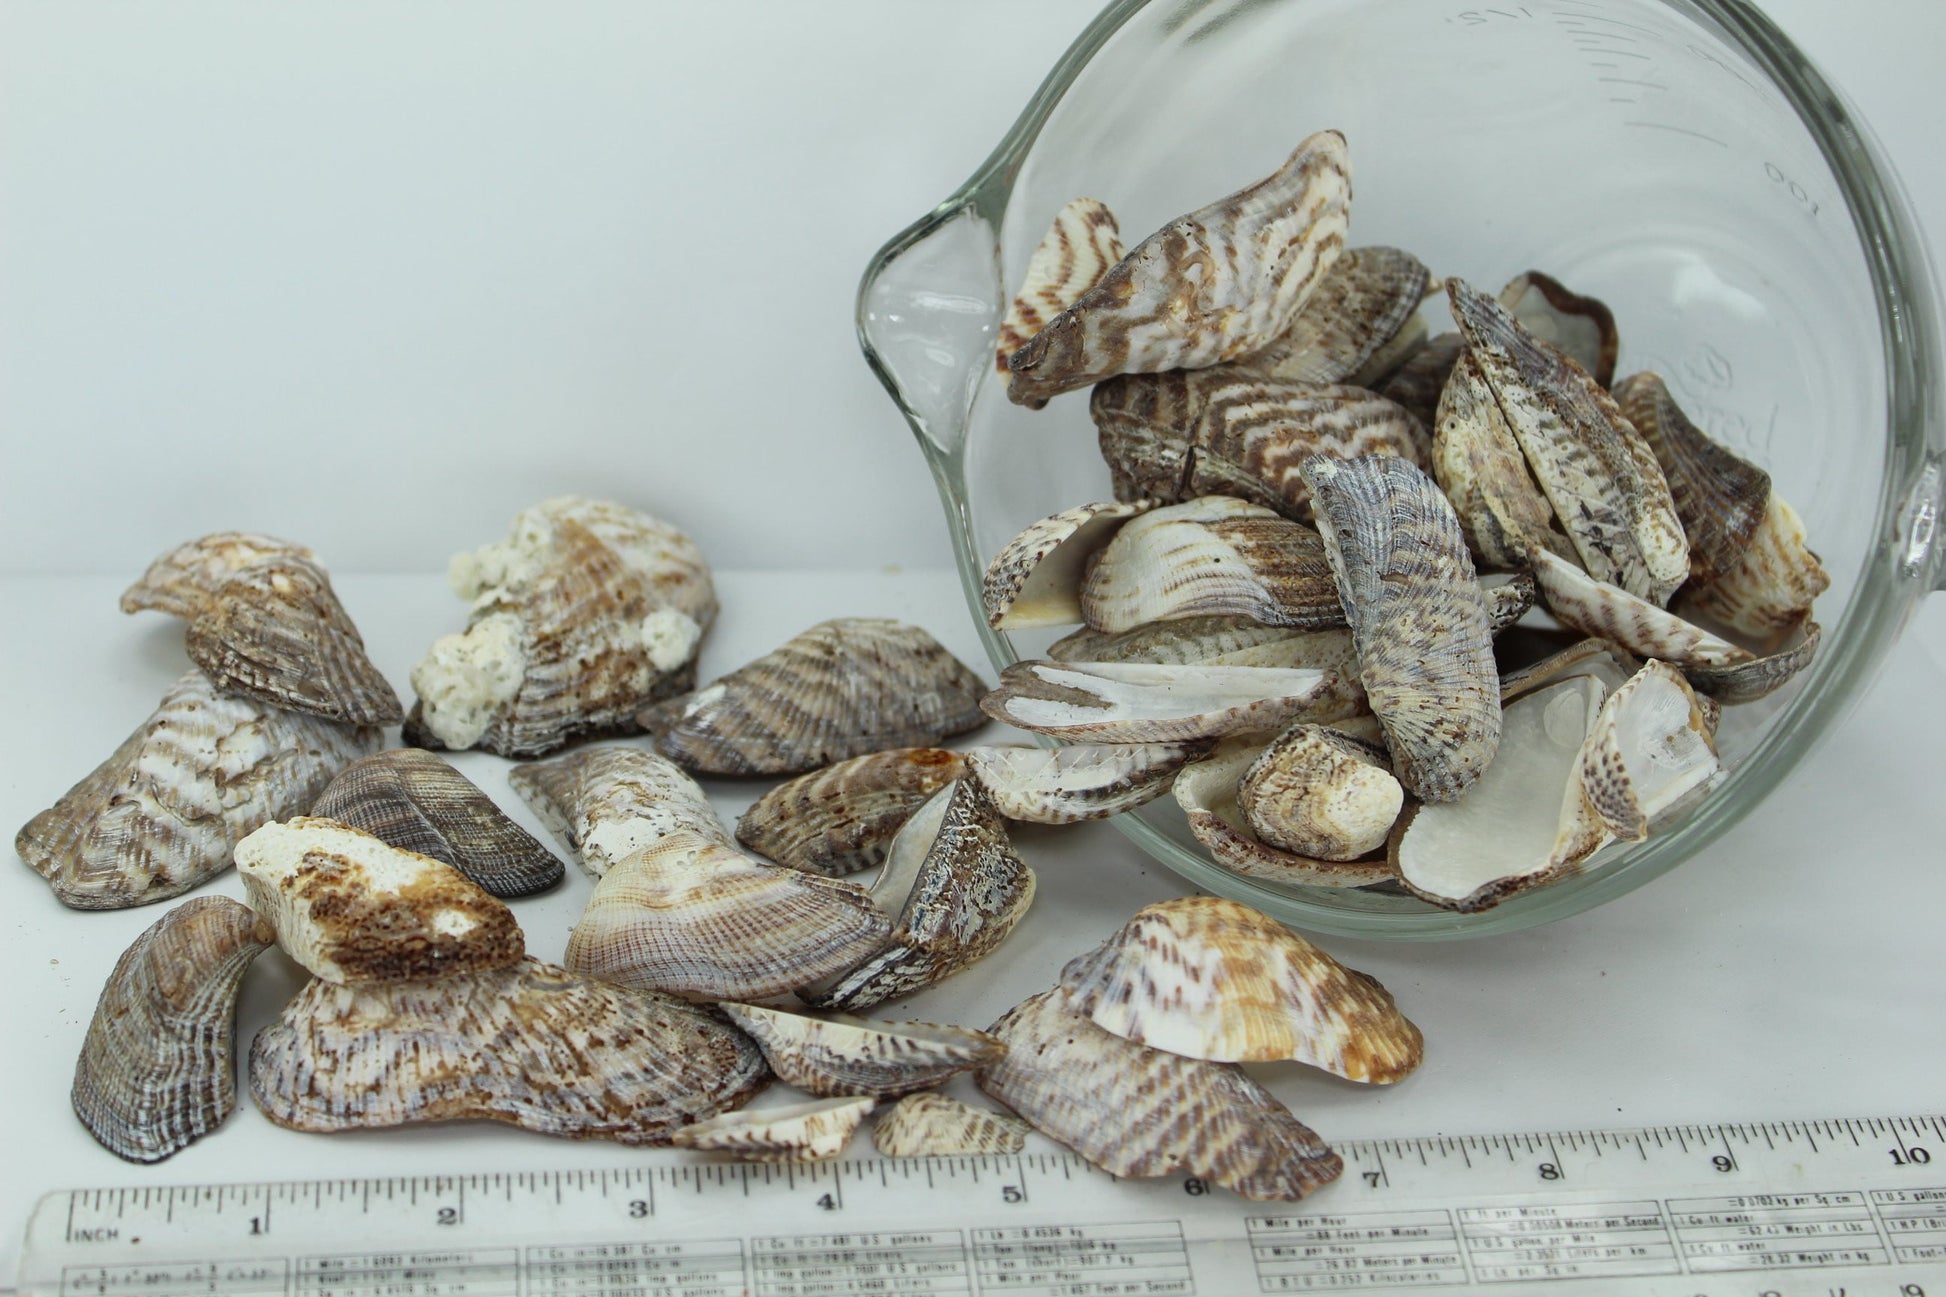 Florida Natural Shells Turkey Wings Uncleaned Bulk 4 Cups Crafts Jewelry Shell Art all sizes